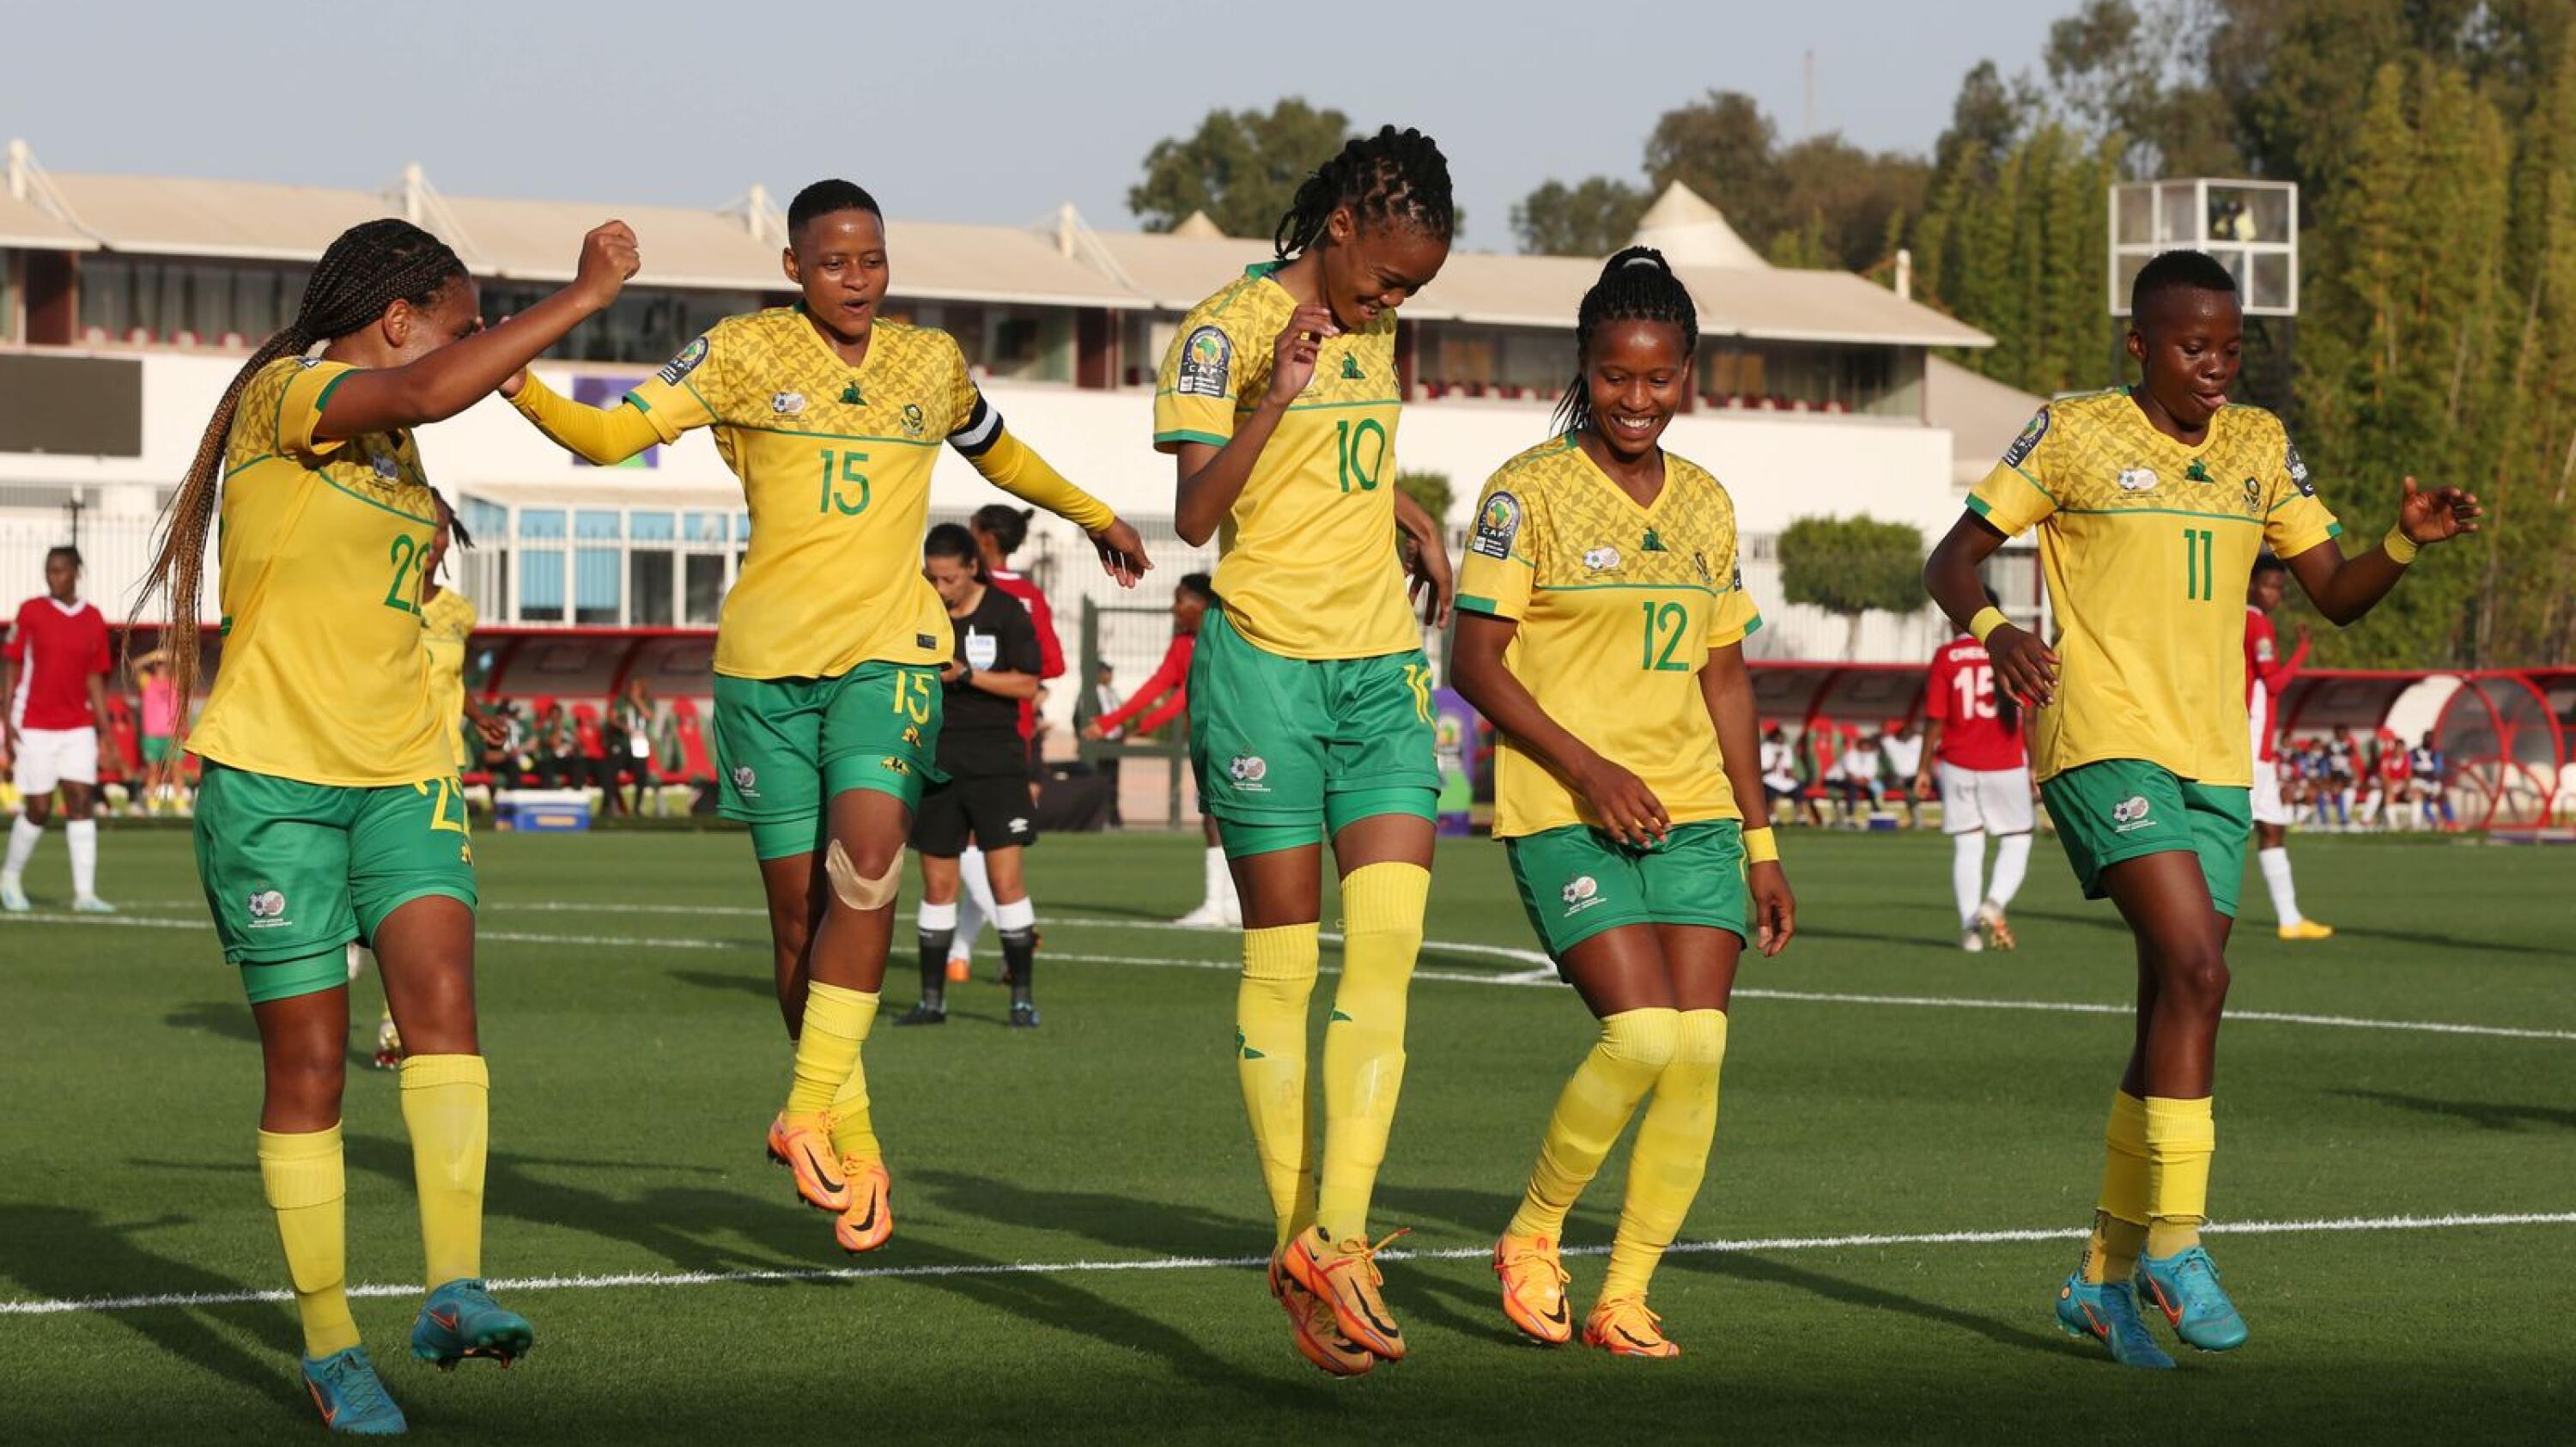 Banyana’s Linda Maserame Motlhalo celebrates with teammates after scoring their third goal during their 2022 Womens Africa Cup of Nations match against Burundi at Stade Prince Moulay Al Hassan, Rabat on Thursday